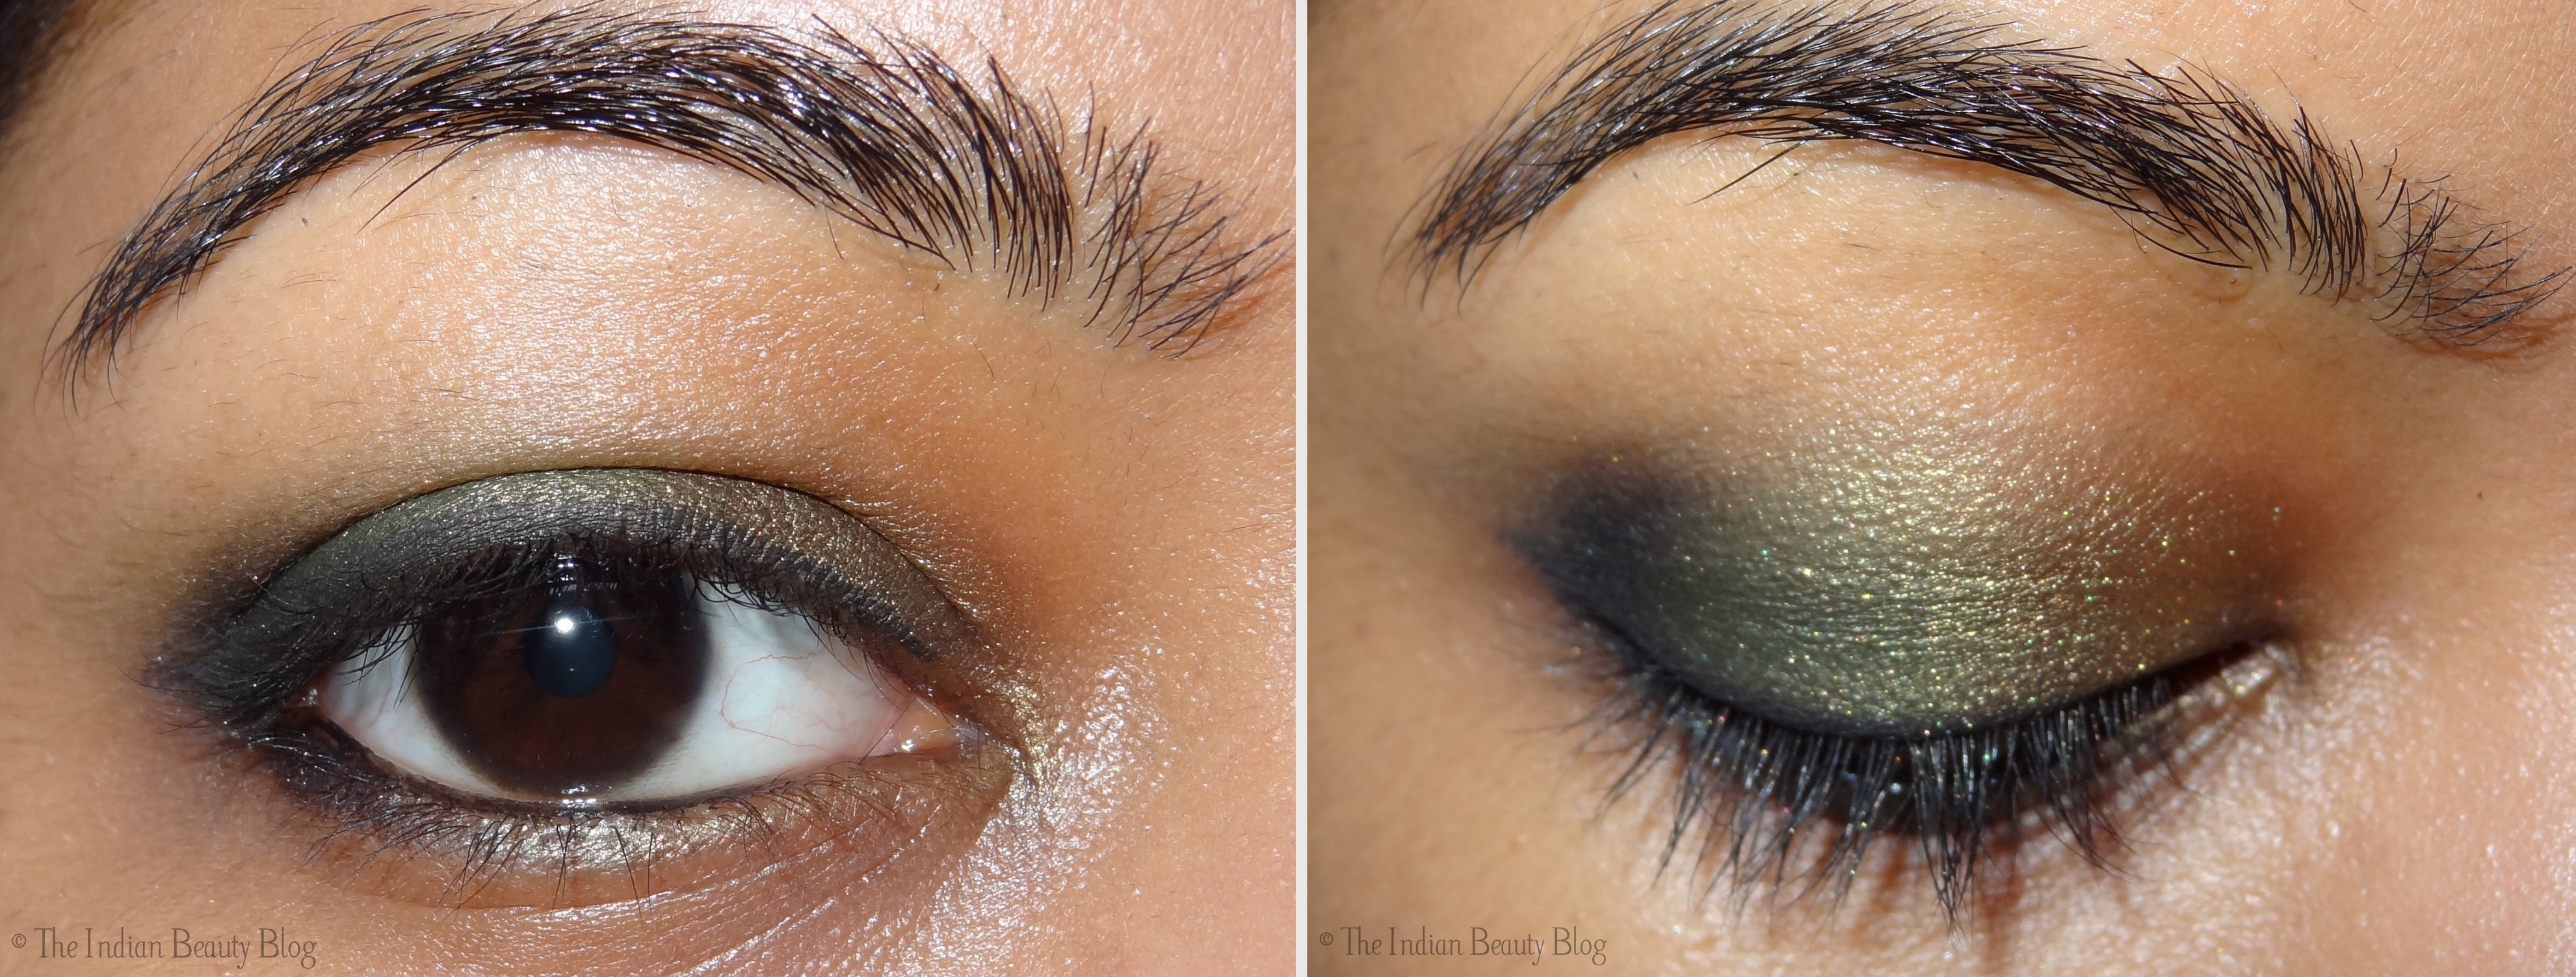 Gold Makeup For Green Eyes 30 Days Eye Makeup Challenge Look 6 The Indian Beauty Blog